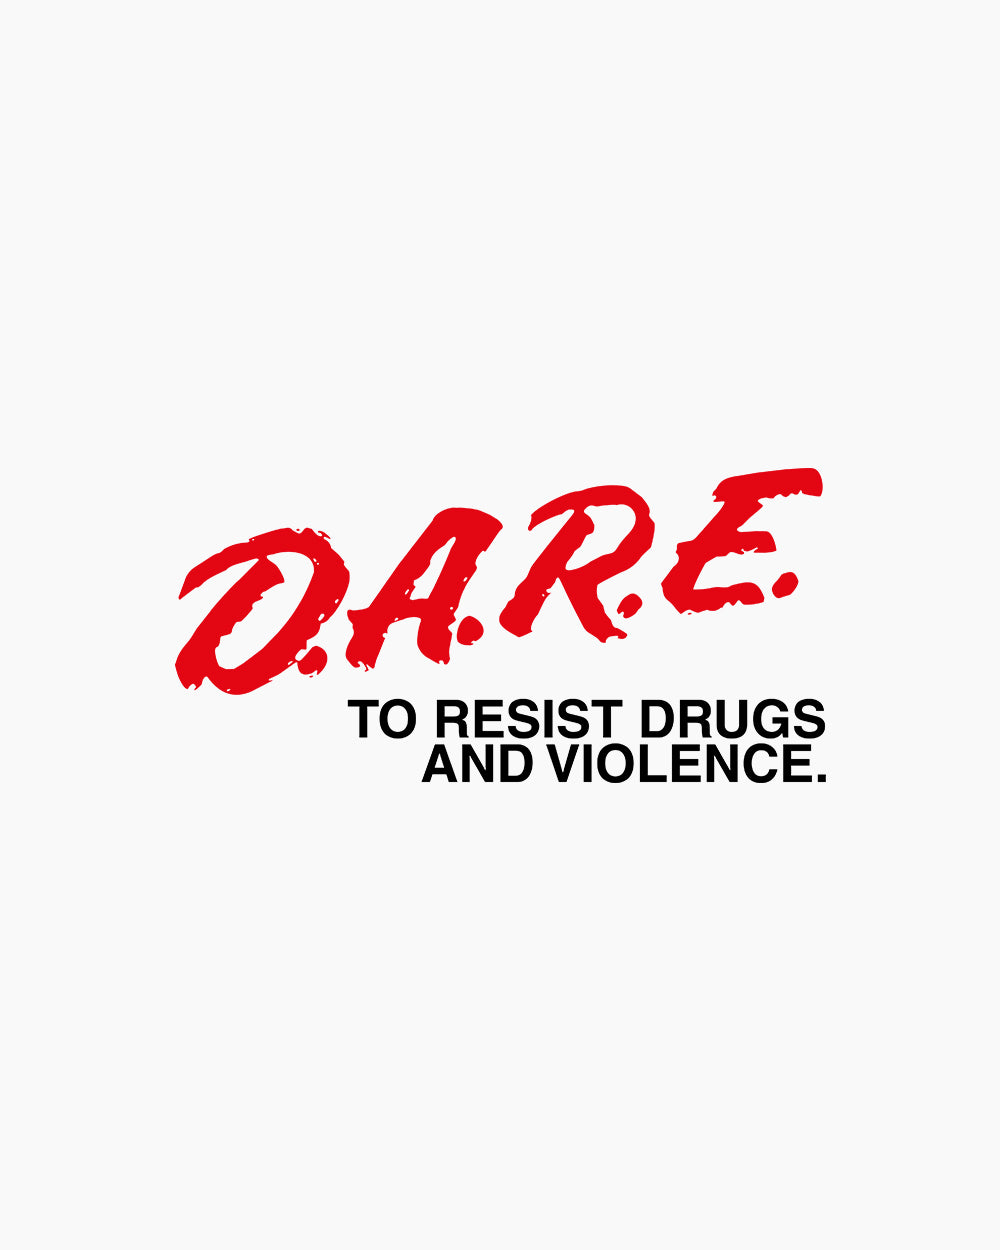 DARE to Resist Drugs and Violence Hoodie Australia Online #colour_white